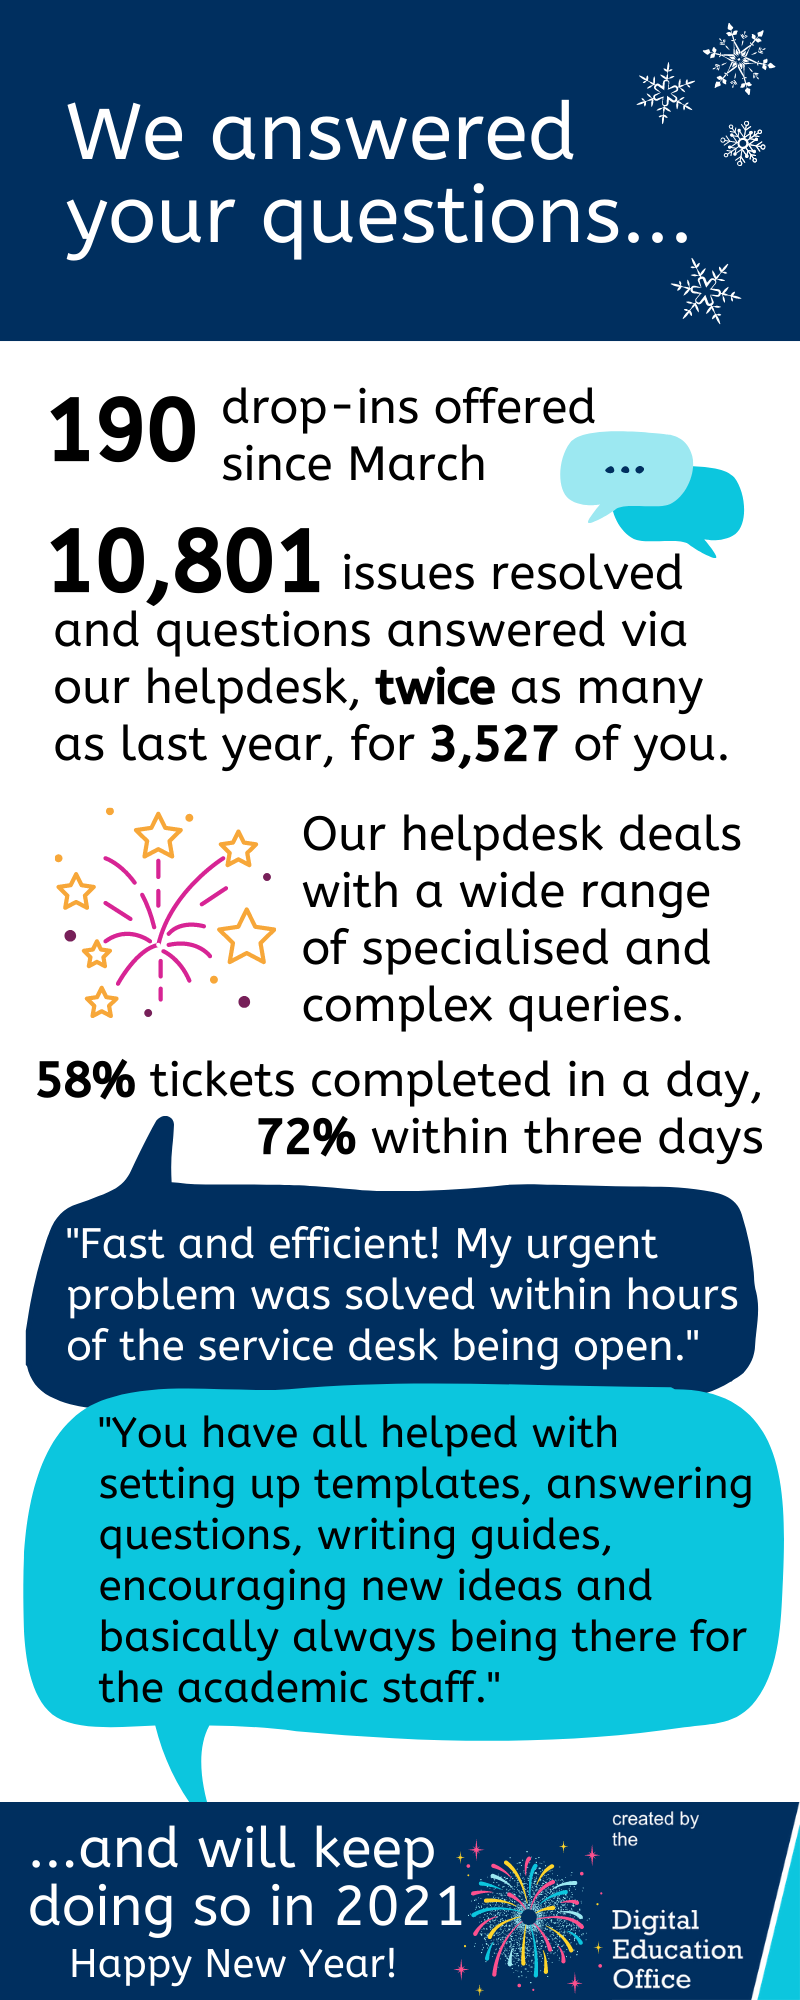 190 dropins. 10801 tickets answered. 58% completed in a day, 72% in 3. Fast & efficient! My urgent problem was solved within hours of the service desk being open. You have helped with setting up templates, answering questions, writing guides, encouraging new ideas & always being there for academic staff. We answered your questions & will keep doing so. Happy New Year! Click for full transcript.